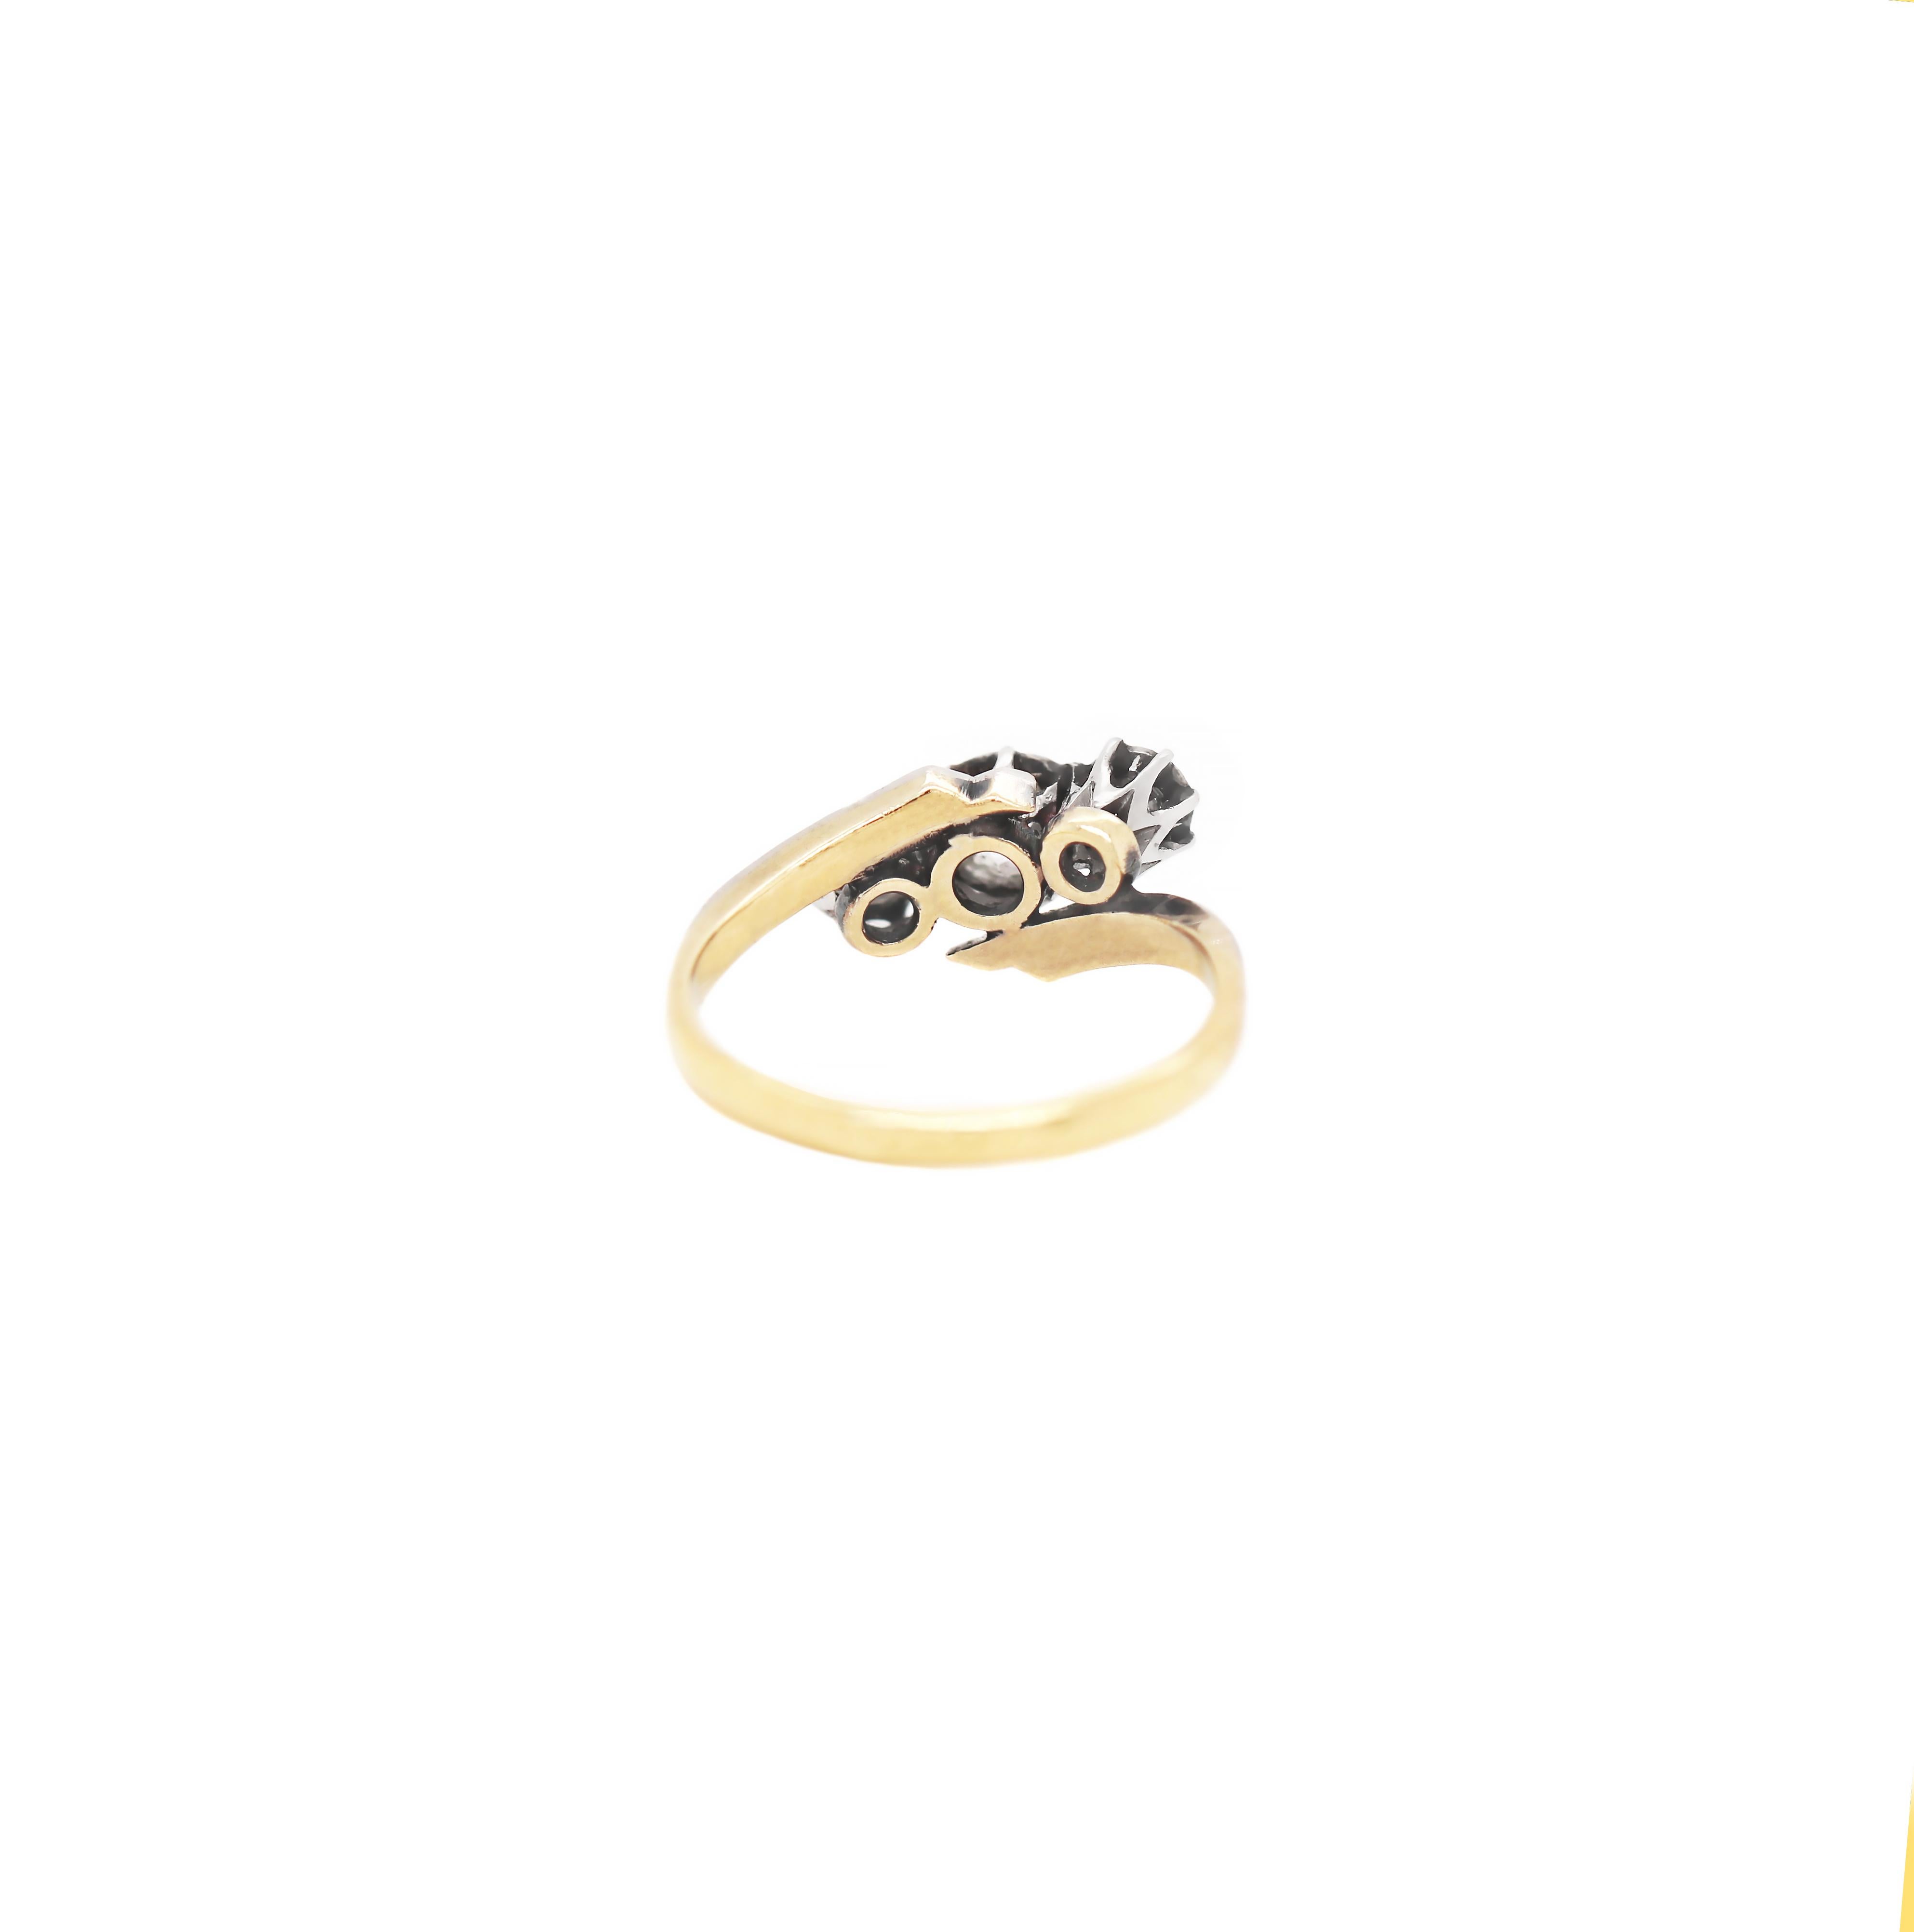 Original antique twist engagement ring set with three old cut diamonds weighing approximately 0.70ct all in typical 1920's platinum illusion settings. The platinum twist is sat atop an 18 carat yellow gold shank stamped 18CT PLAT. UK finger size 'N'.